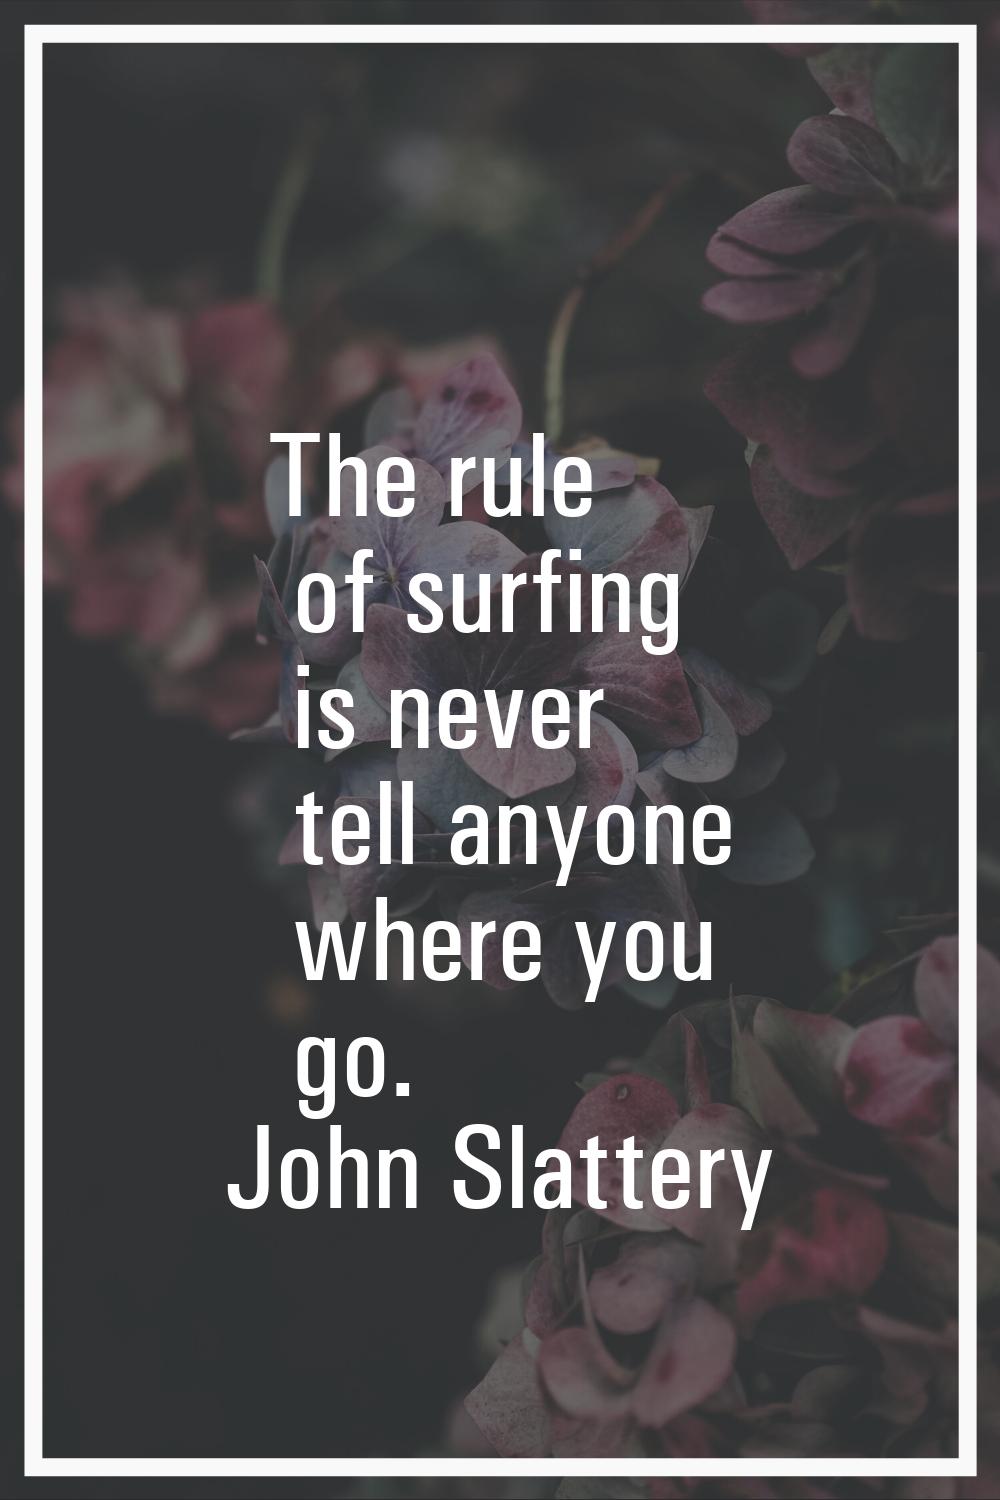 The rule of surfing is never tell anyone where you go.